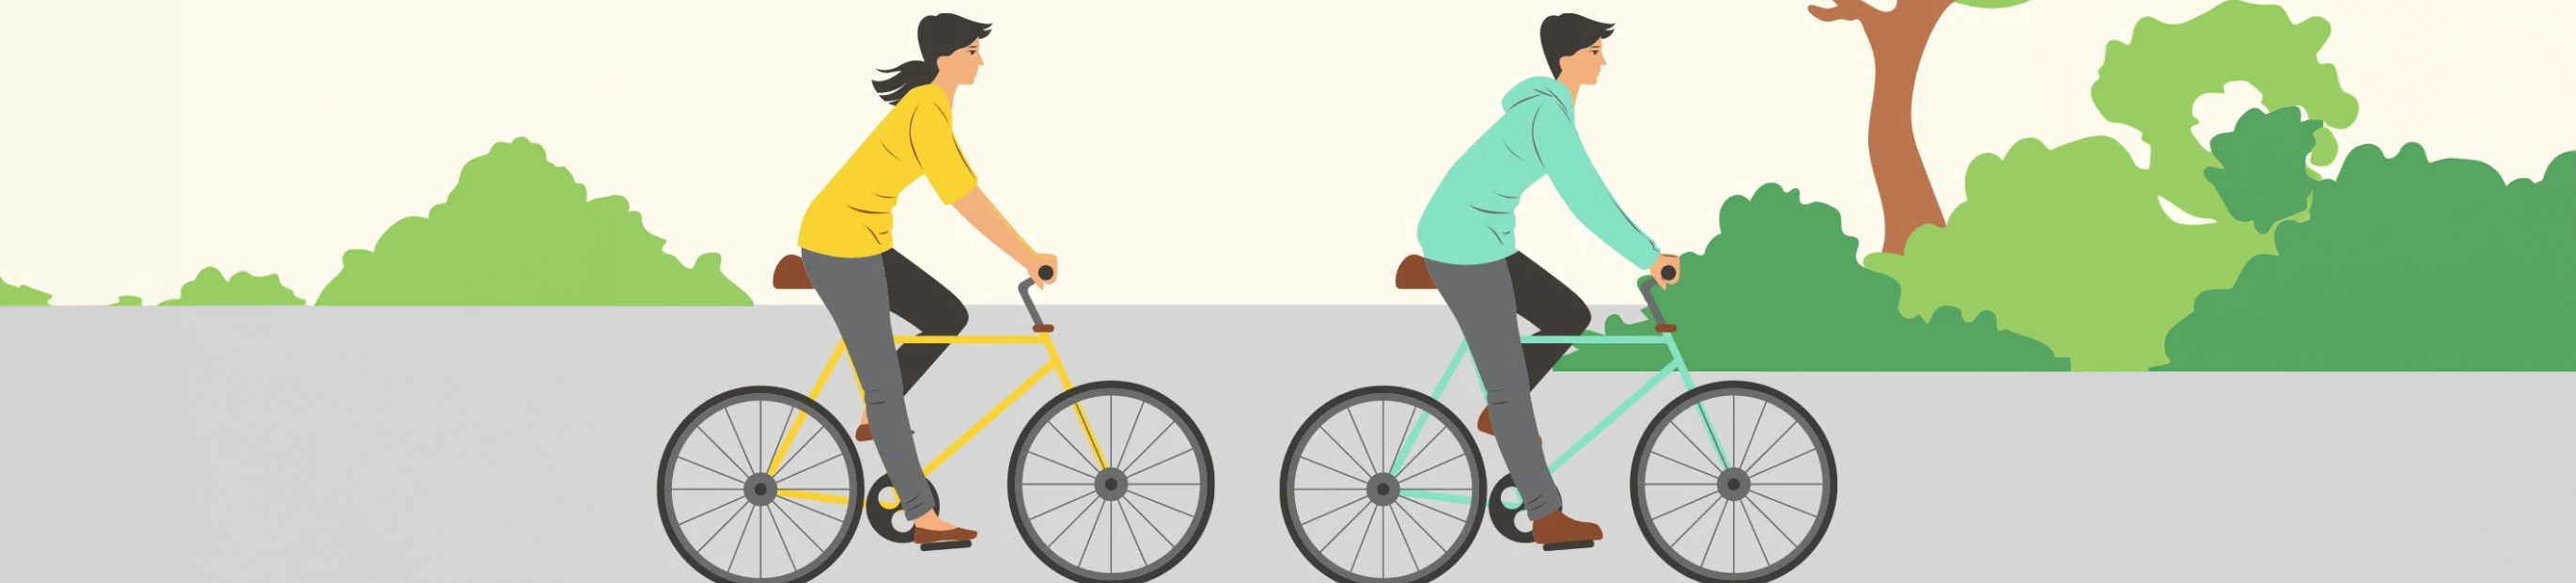 Illustration image with two cyclists